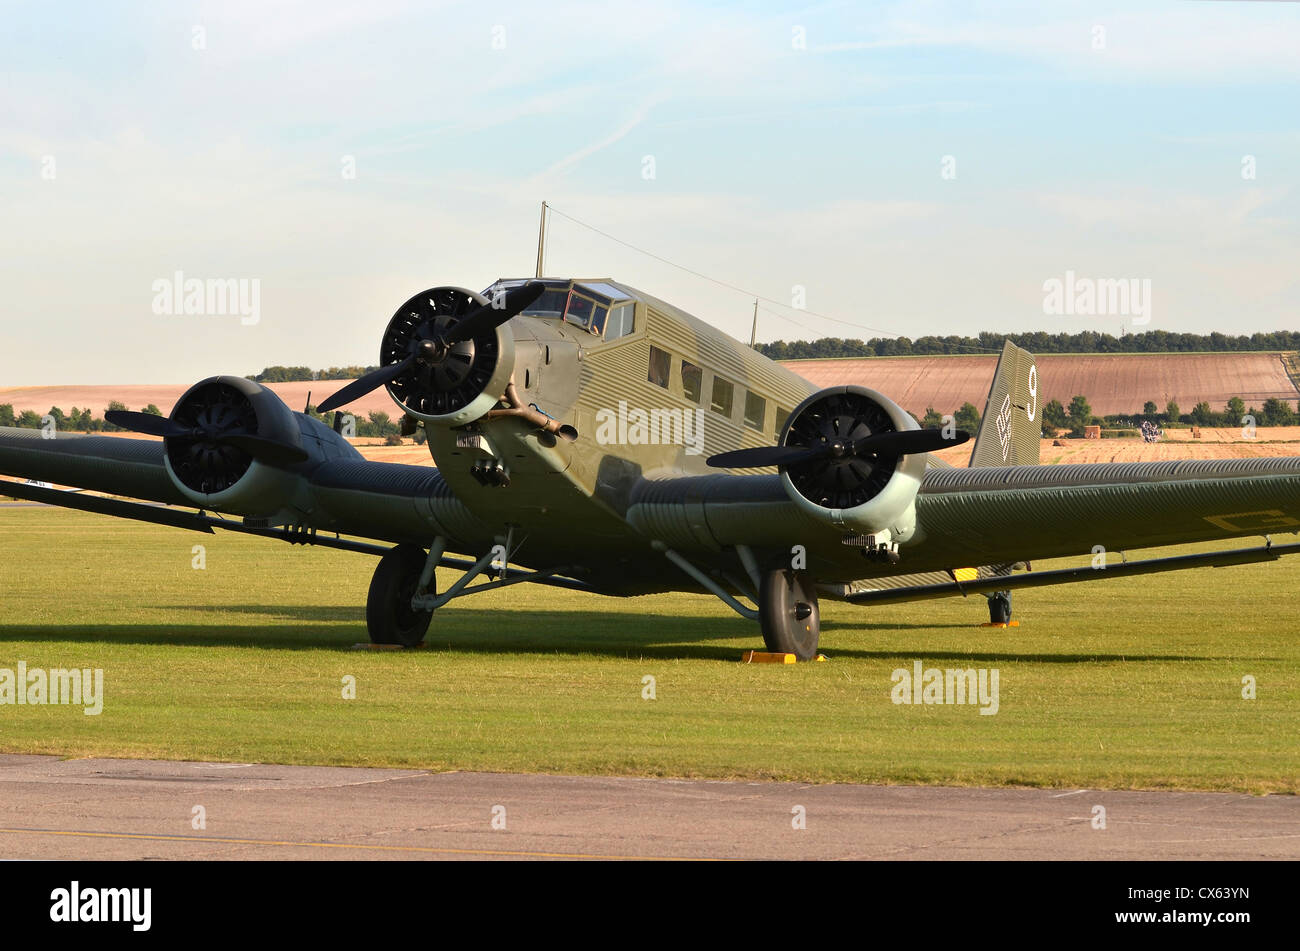 Junkers Ju 52/3M in Luftwaffe markings on display at Duxford Airshow 2012 Stock Photo